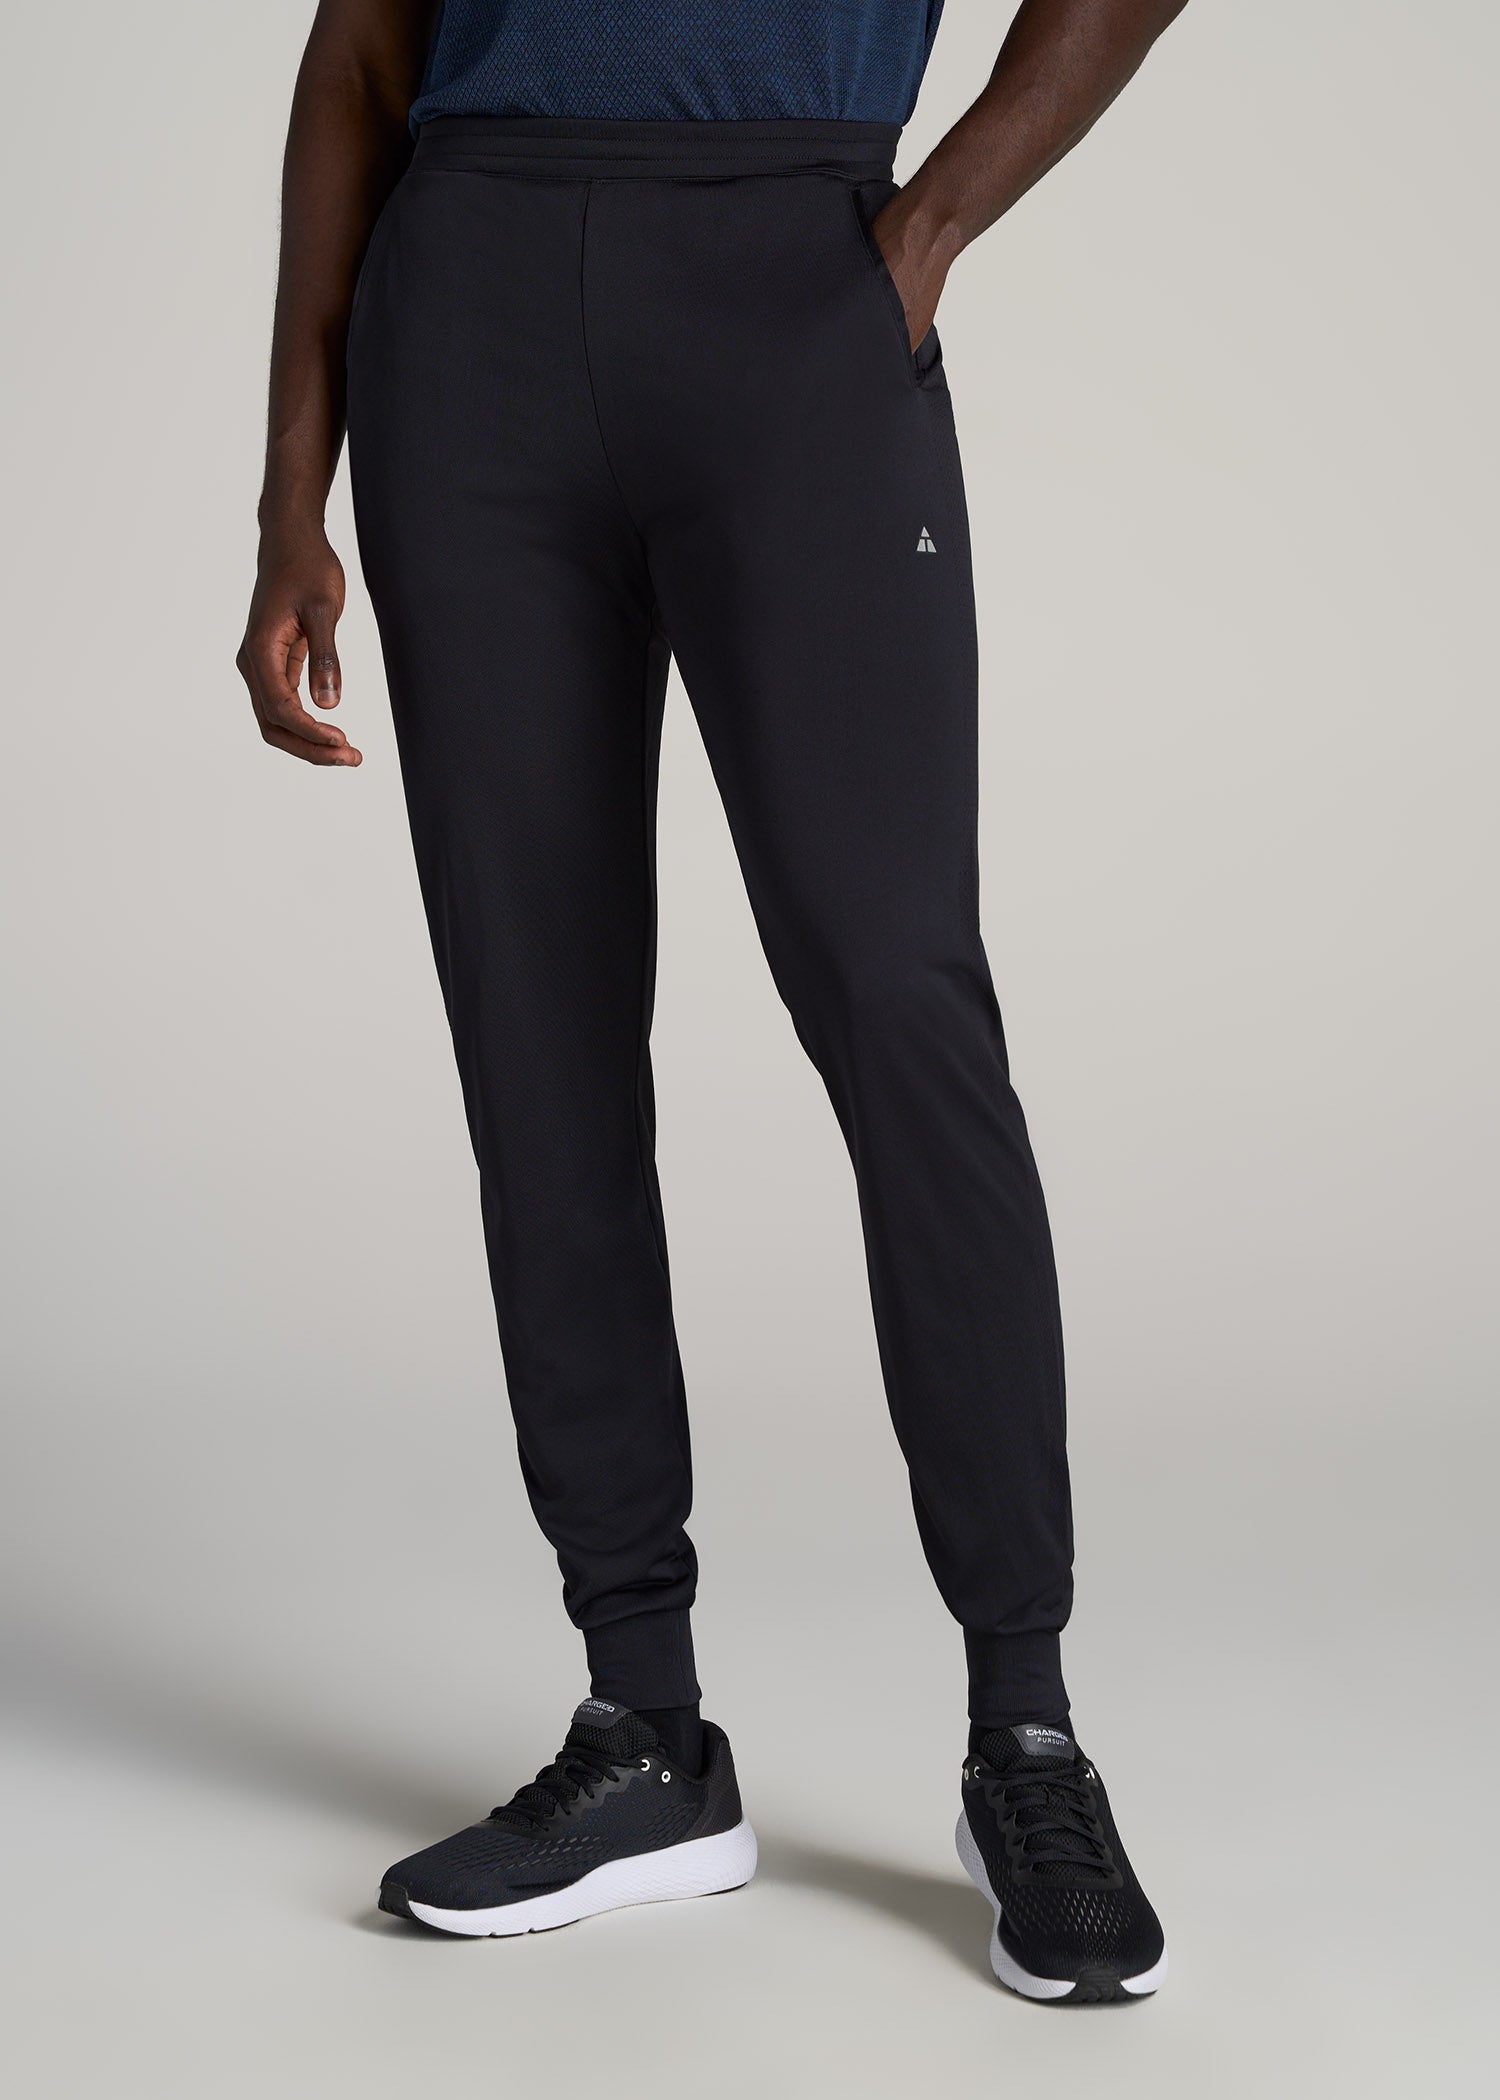 SLIM-FIT Lightweight French Terry Joggers for Tall Men in Black